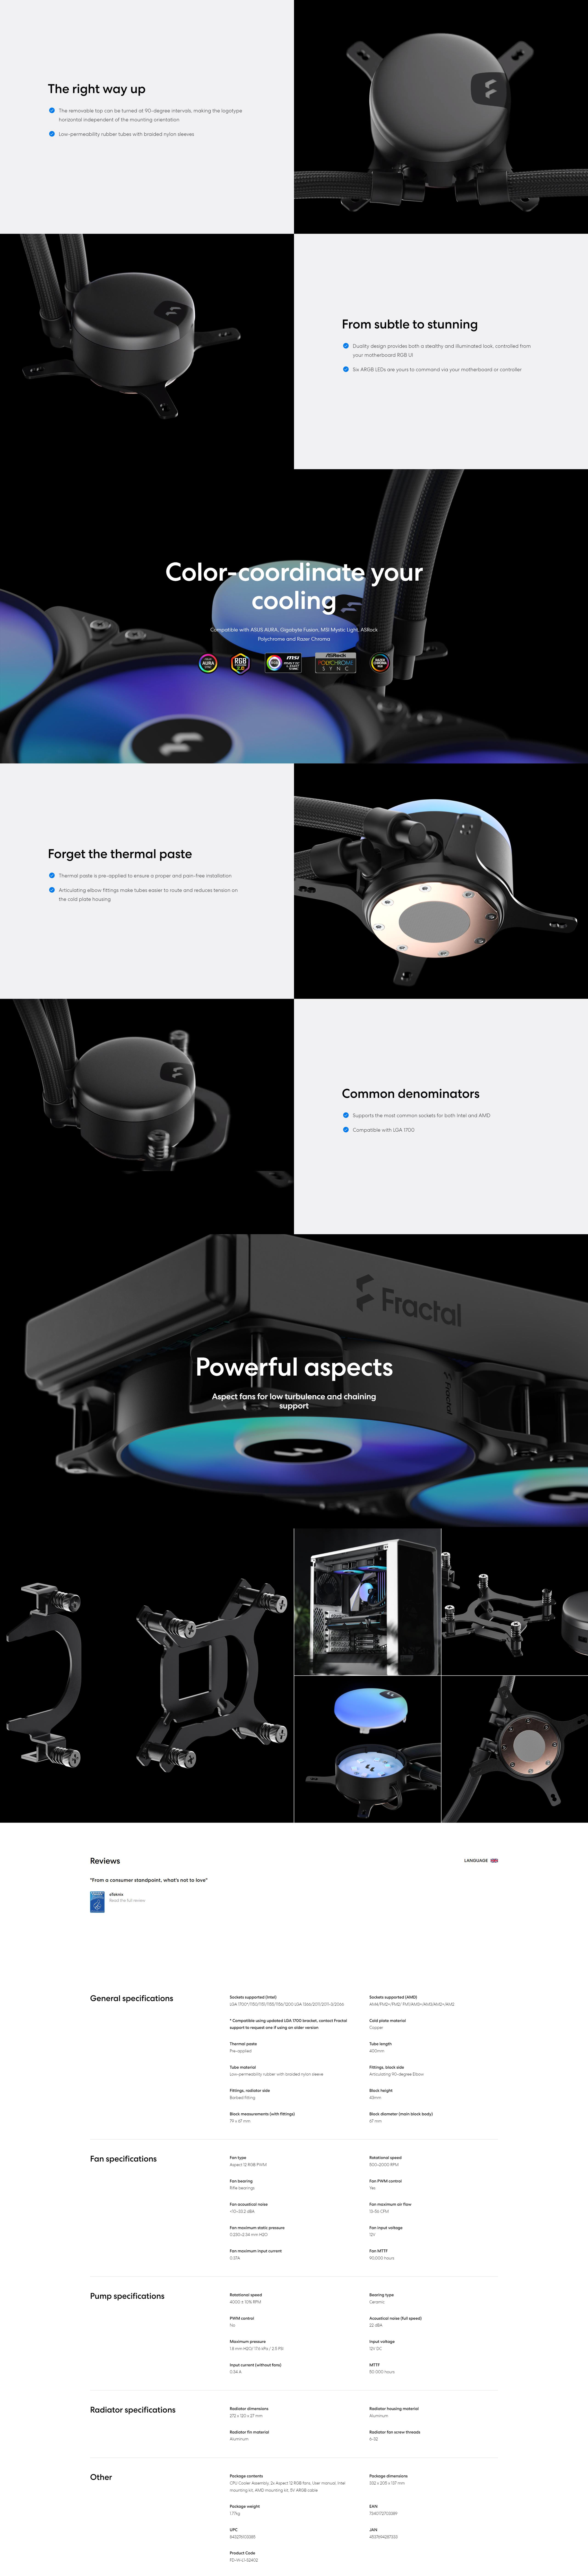 A large marketing image providing additional information about the product Fractal Design Lumen S24 RGB 240mm AIO CPU Cooler V2 - Additional alt info not provided